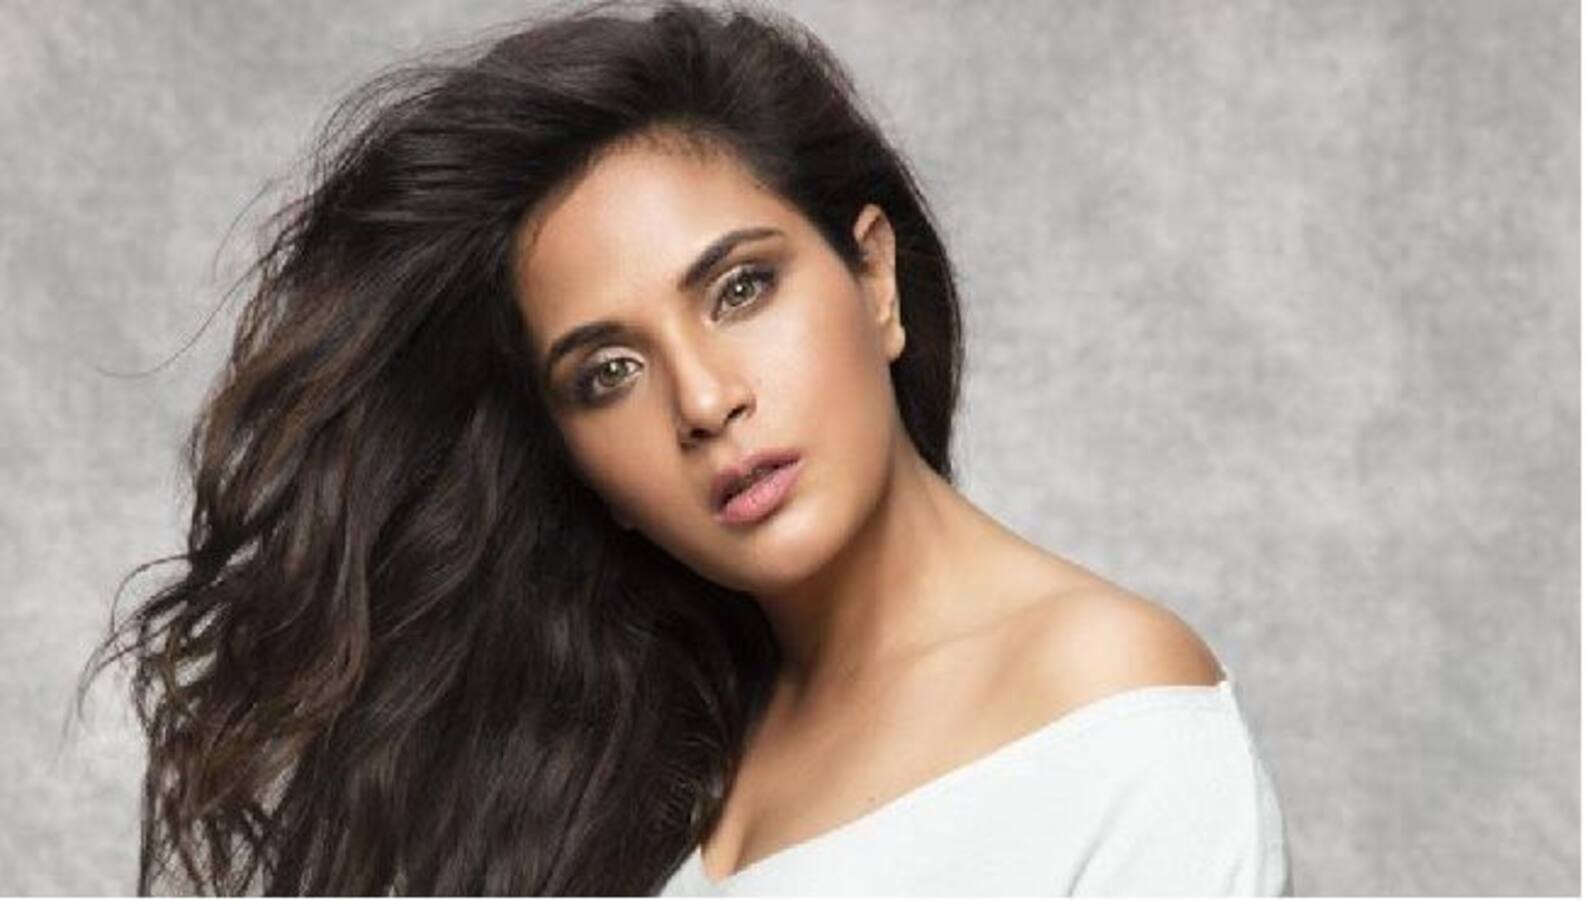 Richa Chadha becomes the face of Save the Elephants campaign by PETA